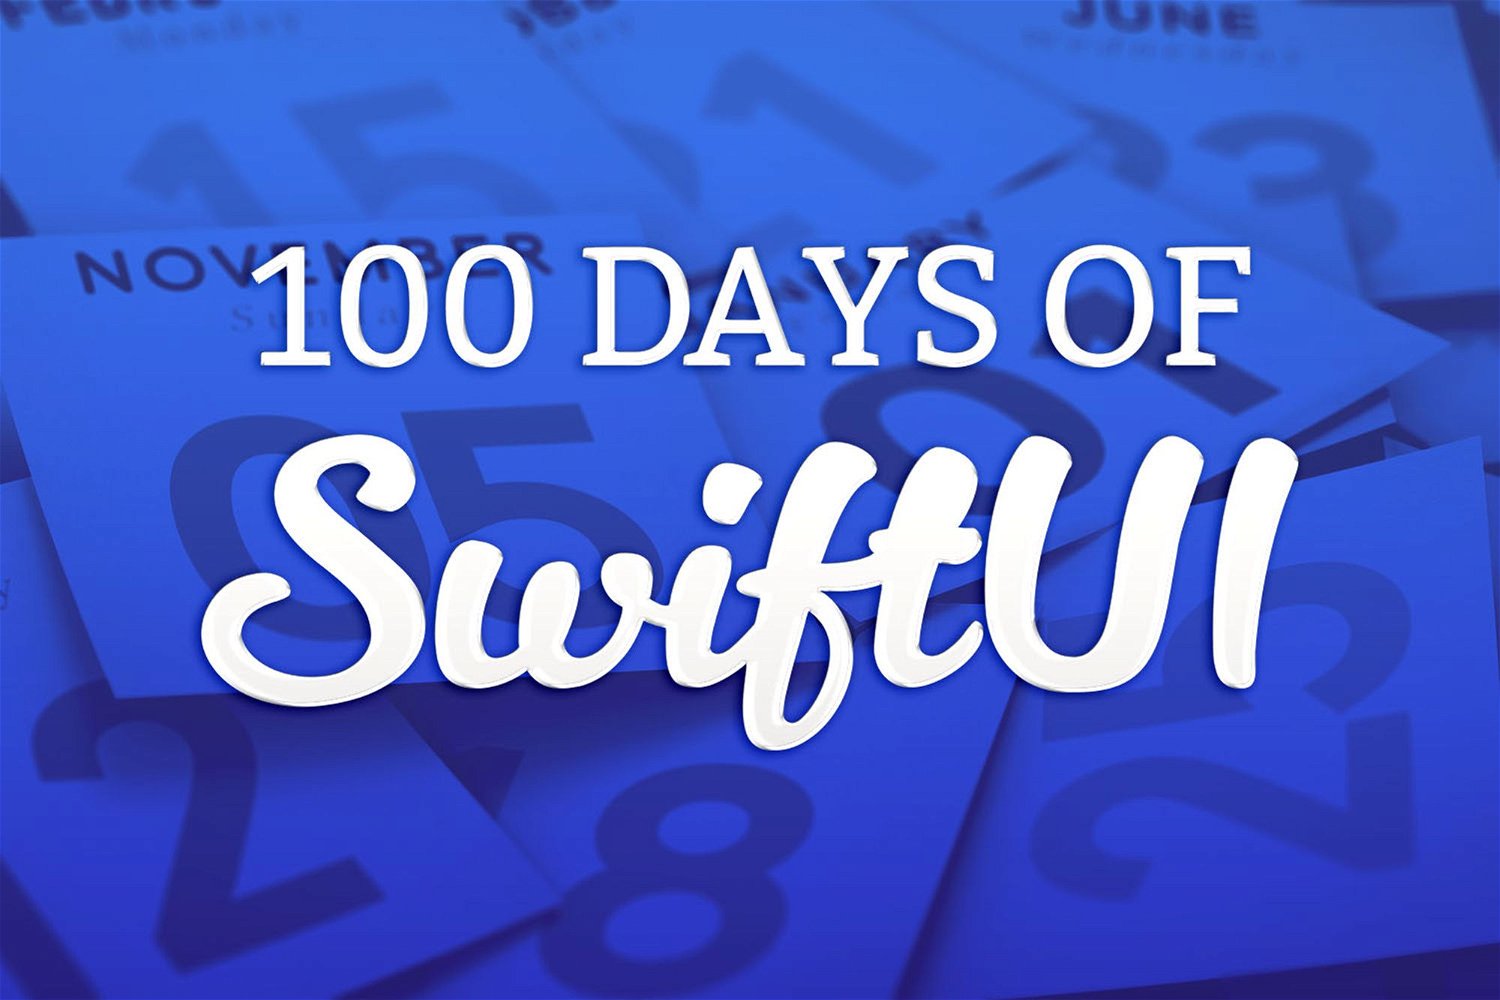 The 100 Days of SwiftUI